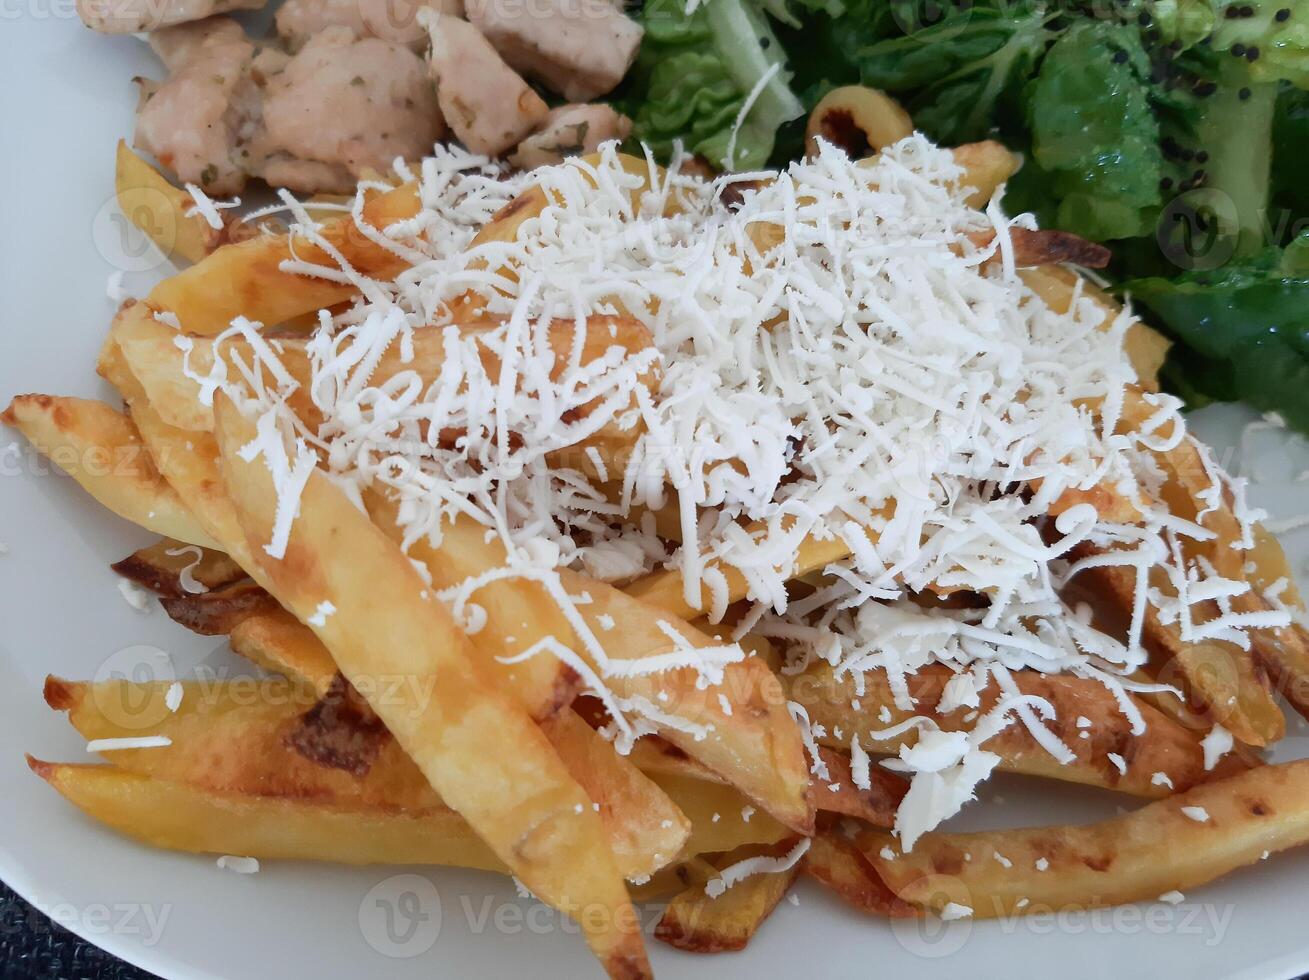 Homemade grilled chicken with french fries, cheese and green salad, served on a white plate photo